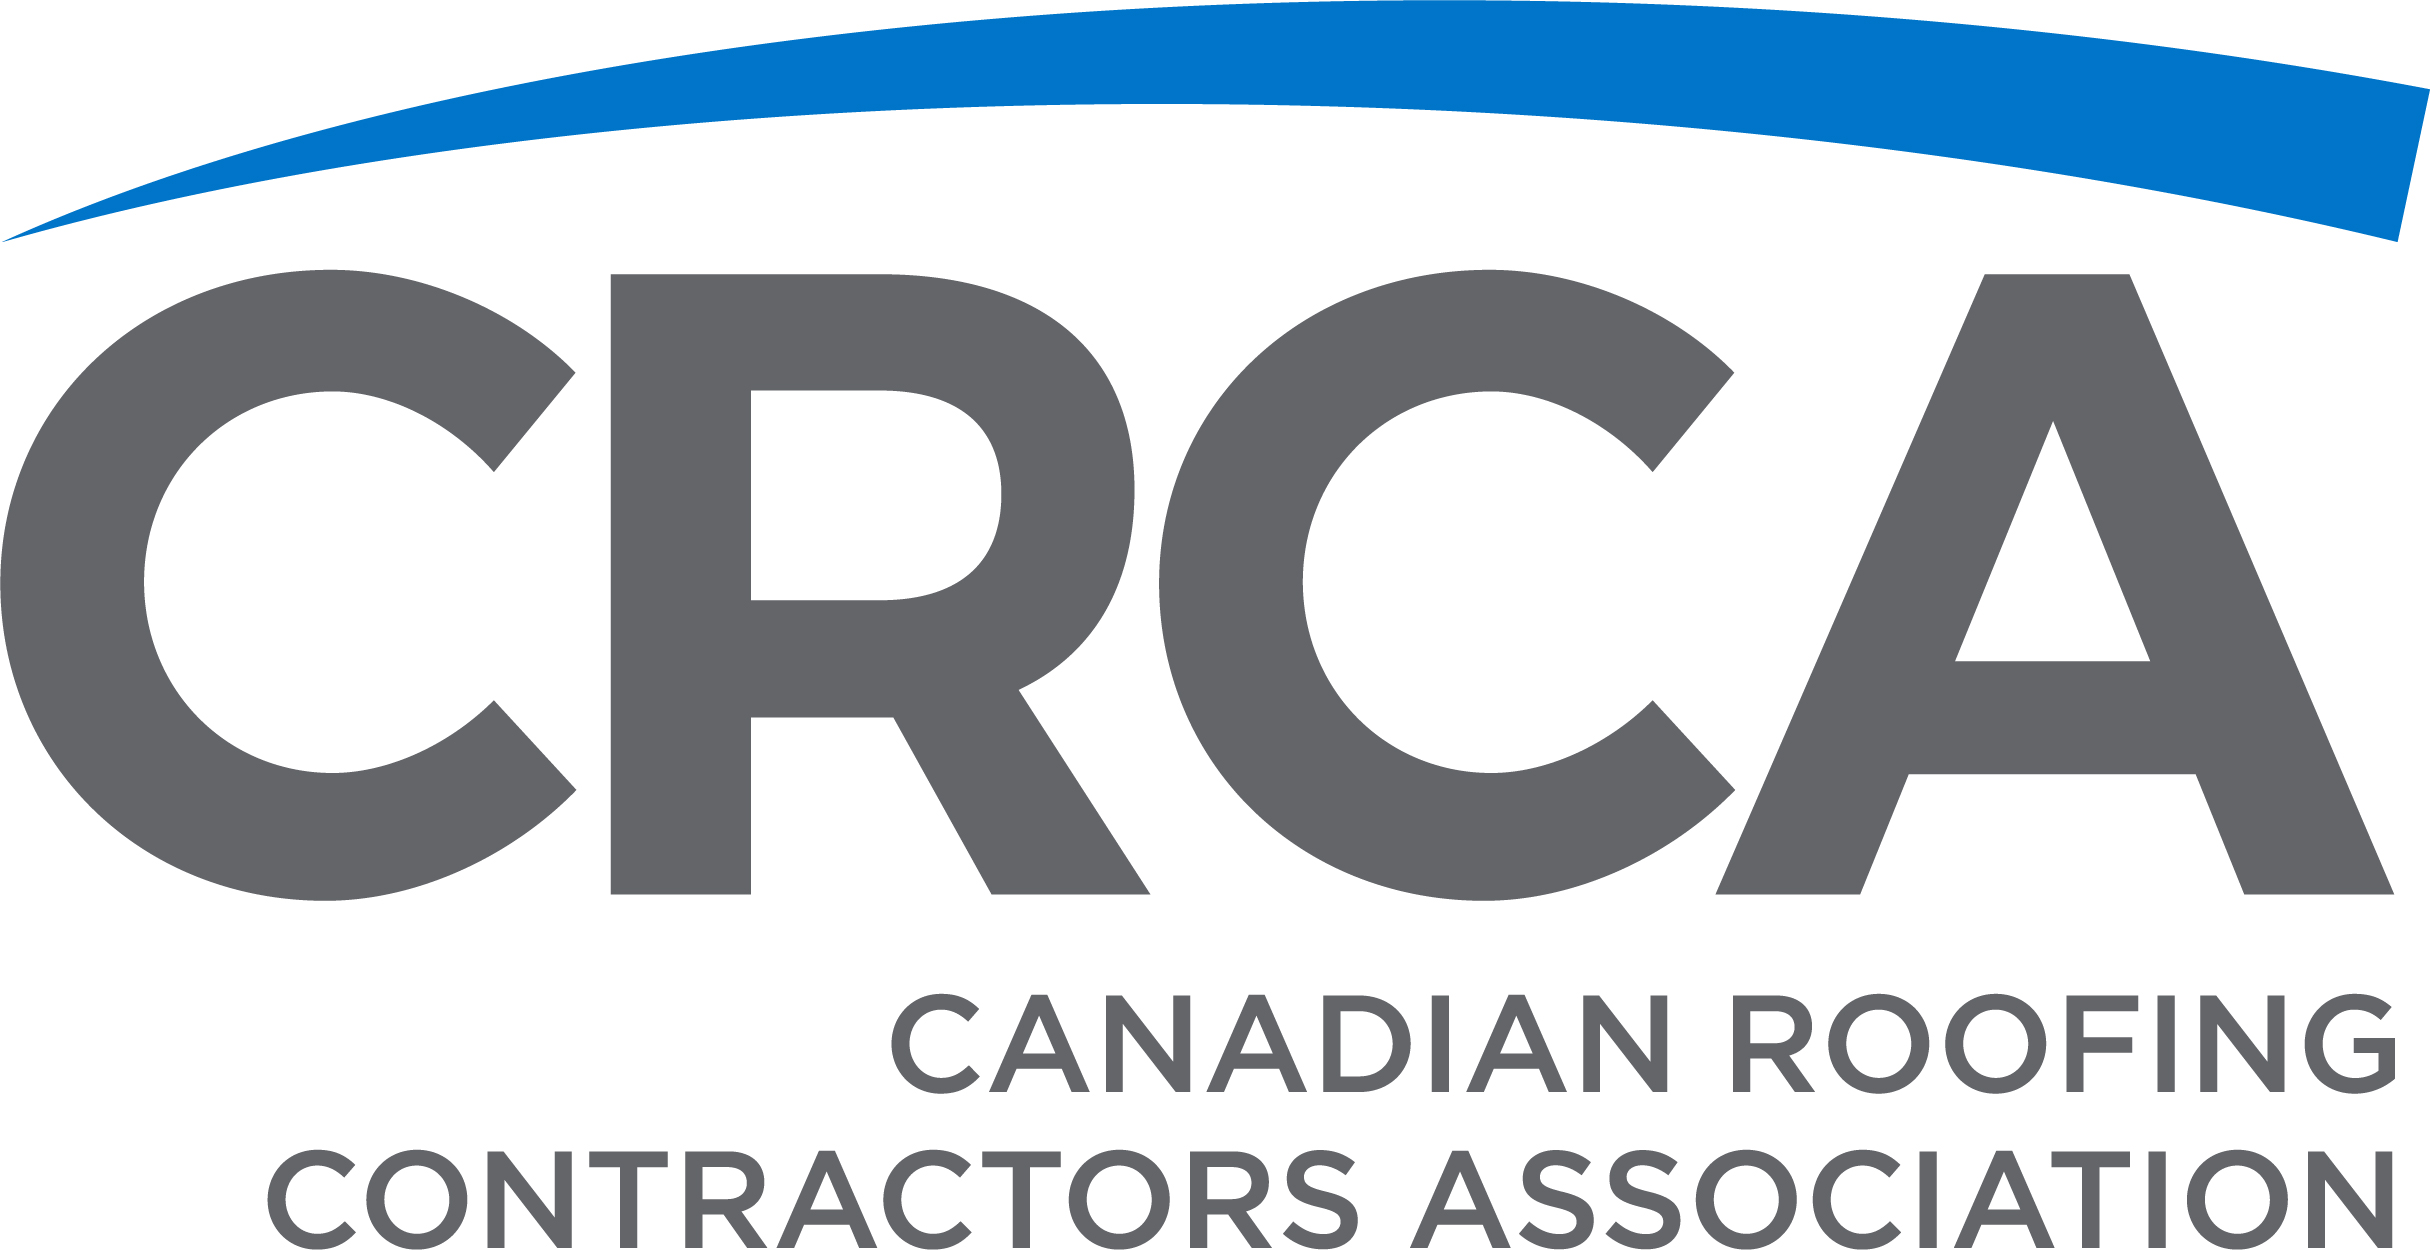 Association Partners International Roofing Expo